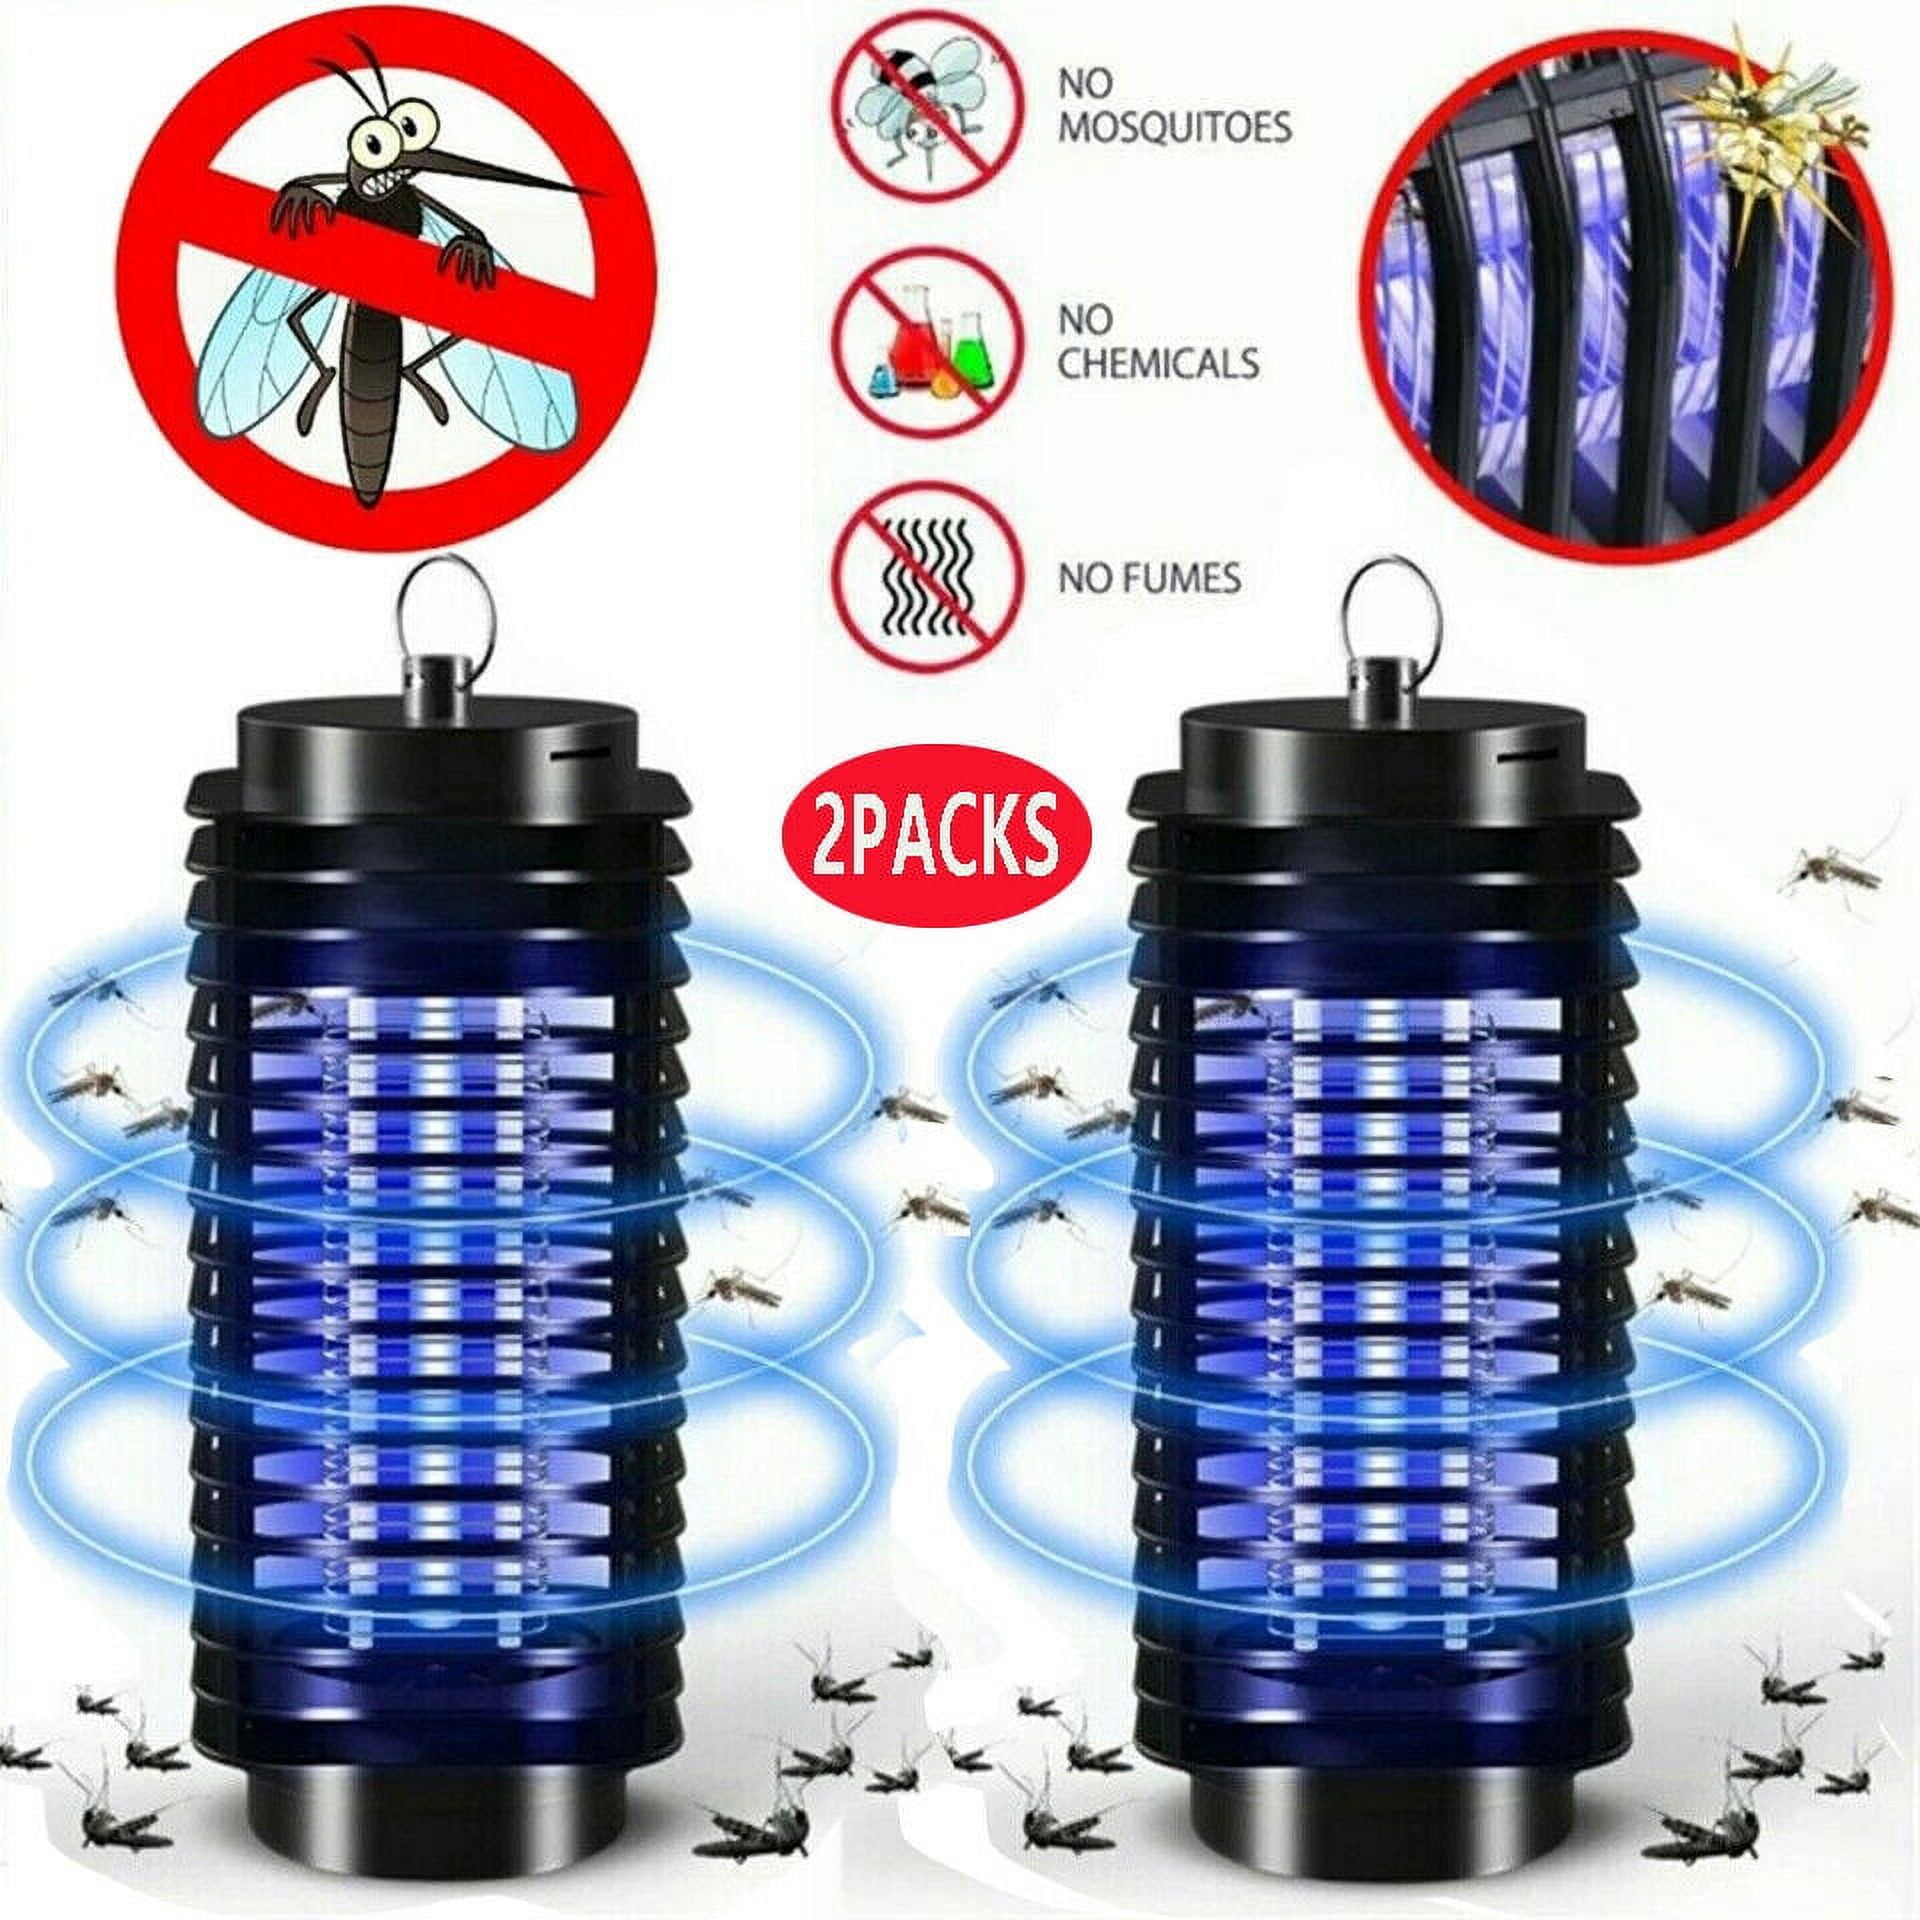 2Pack Electric Mosquito Fly Bug Insect Zapper Killer Trap Lamp Stinger ...